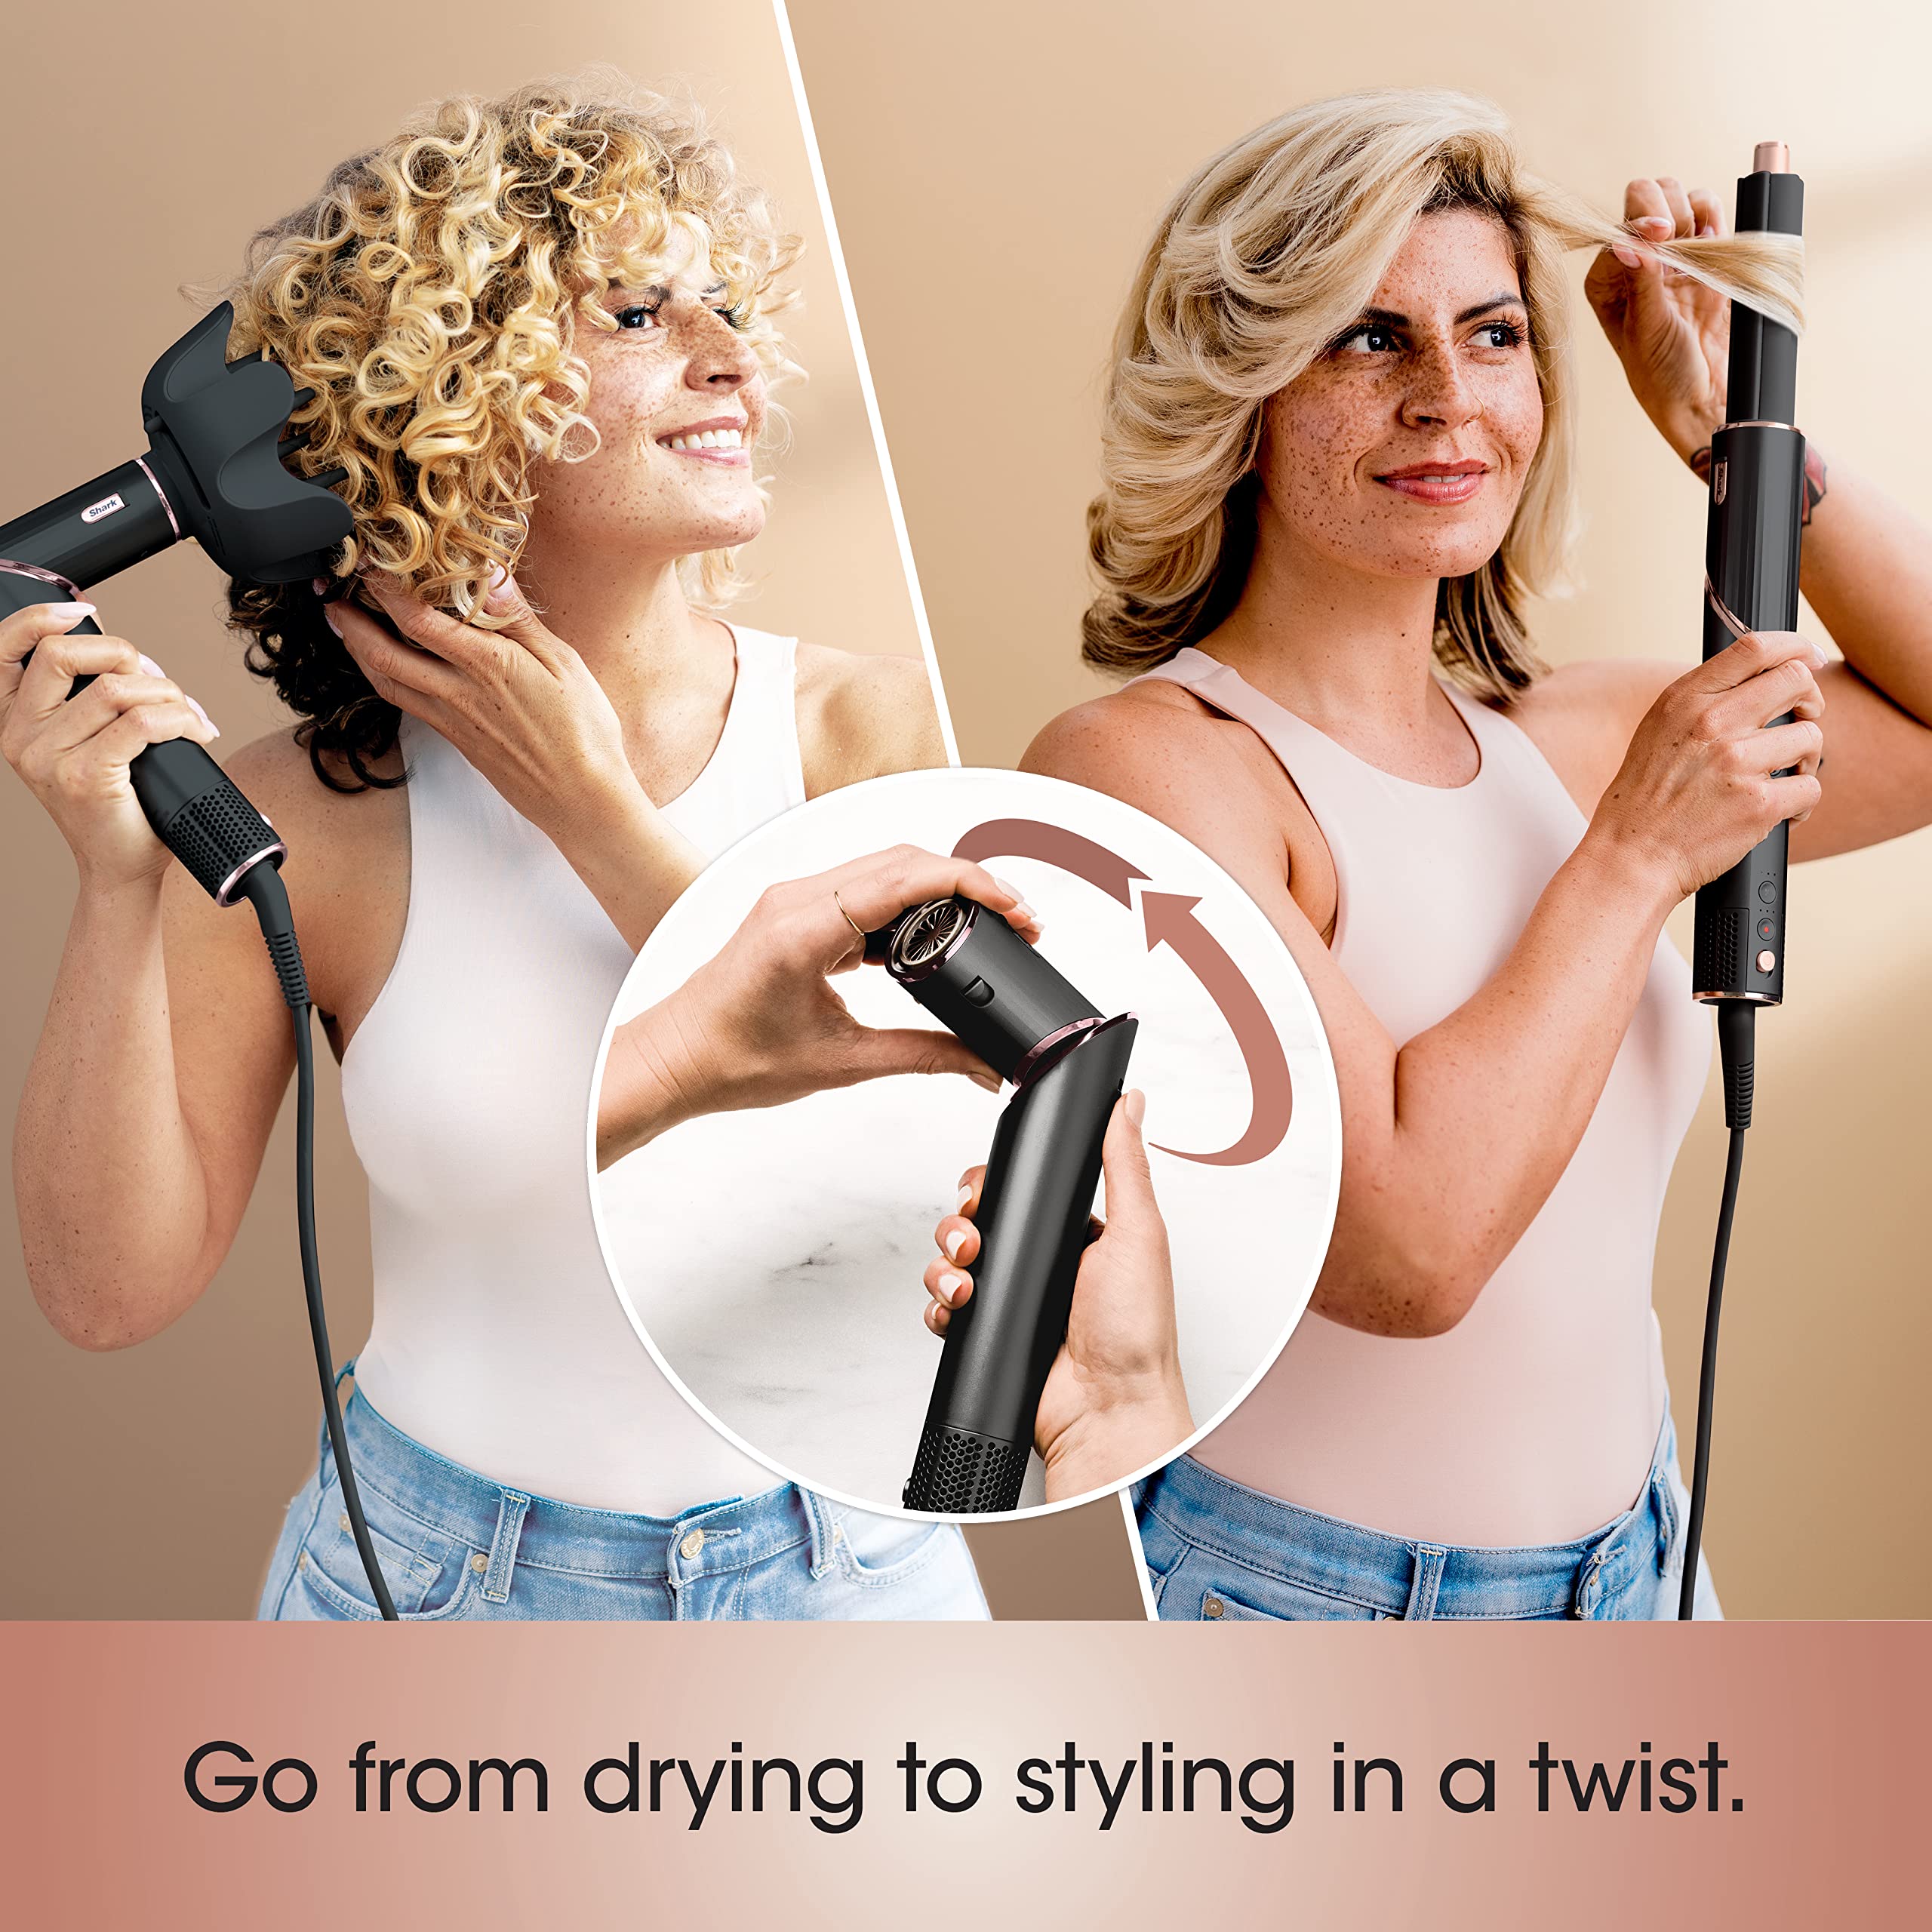 Shark HD440BK FlexStyle Air Drying & Styling System with Ultimate 6-Piece Accessory Pack of Auto-Wrap Curlers, Curl-Defining Diffuser, Oval Brush, Paddle Brush & Concentrator Attachments, Black